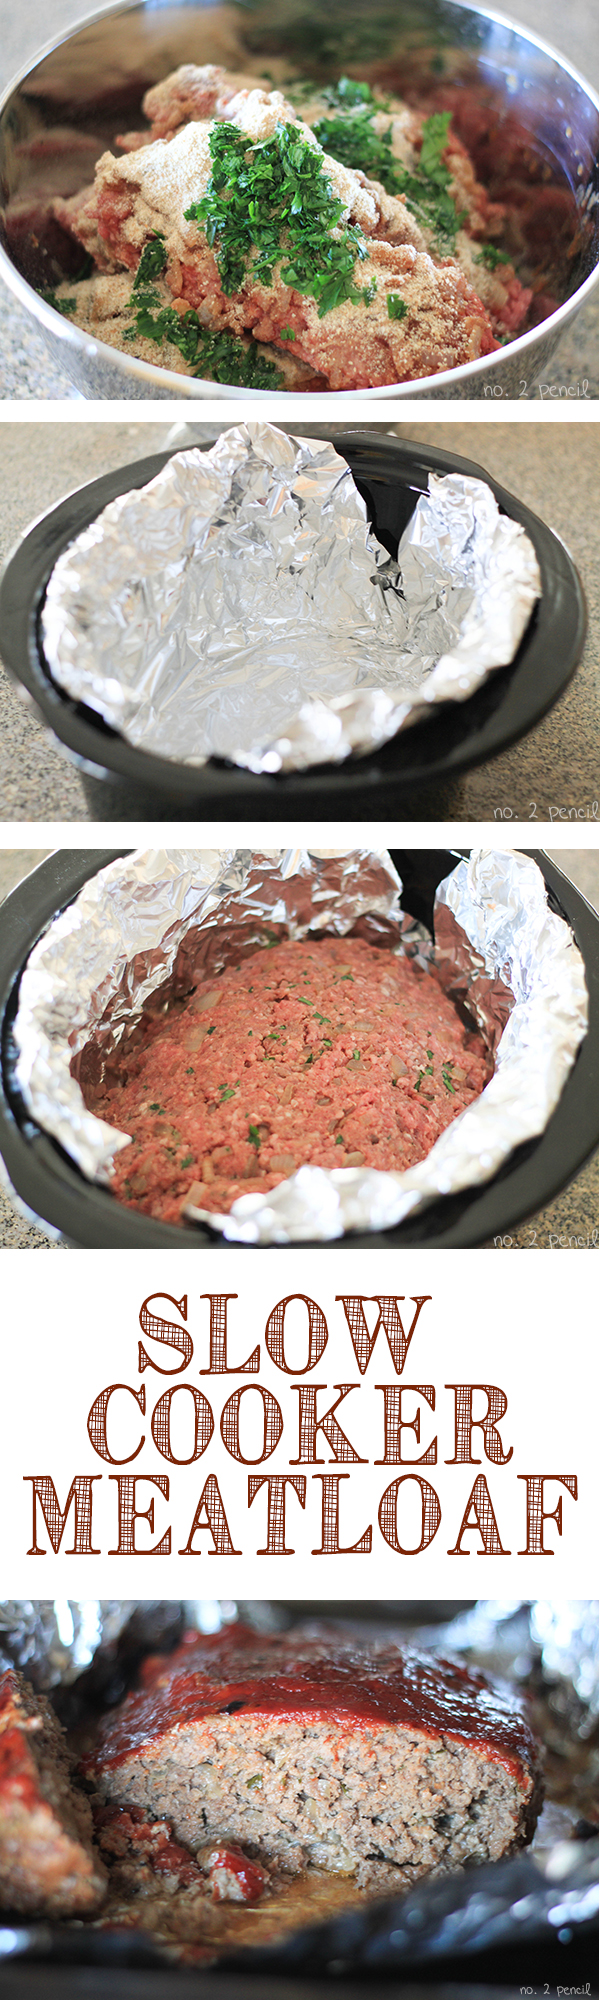 Slow Cooker Meatloaf - tips and tricks for a moist and flavorful meatloaf in the slow cooker!